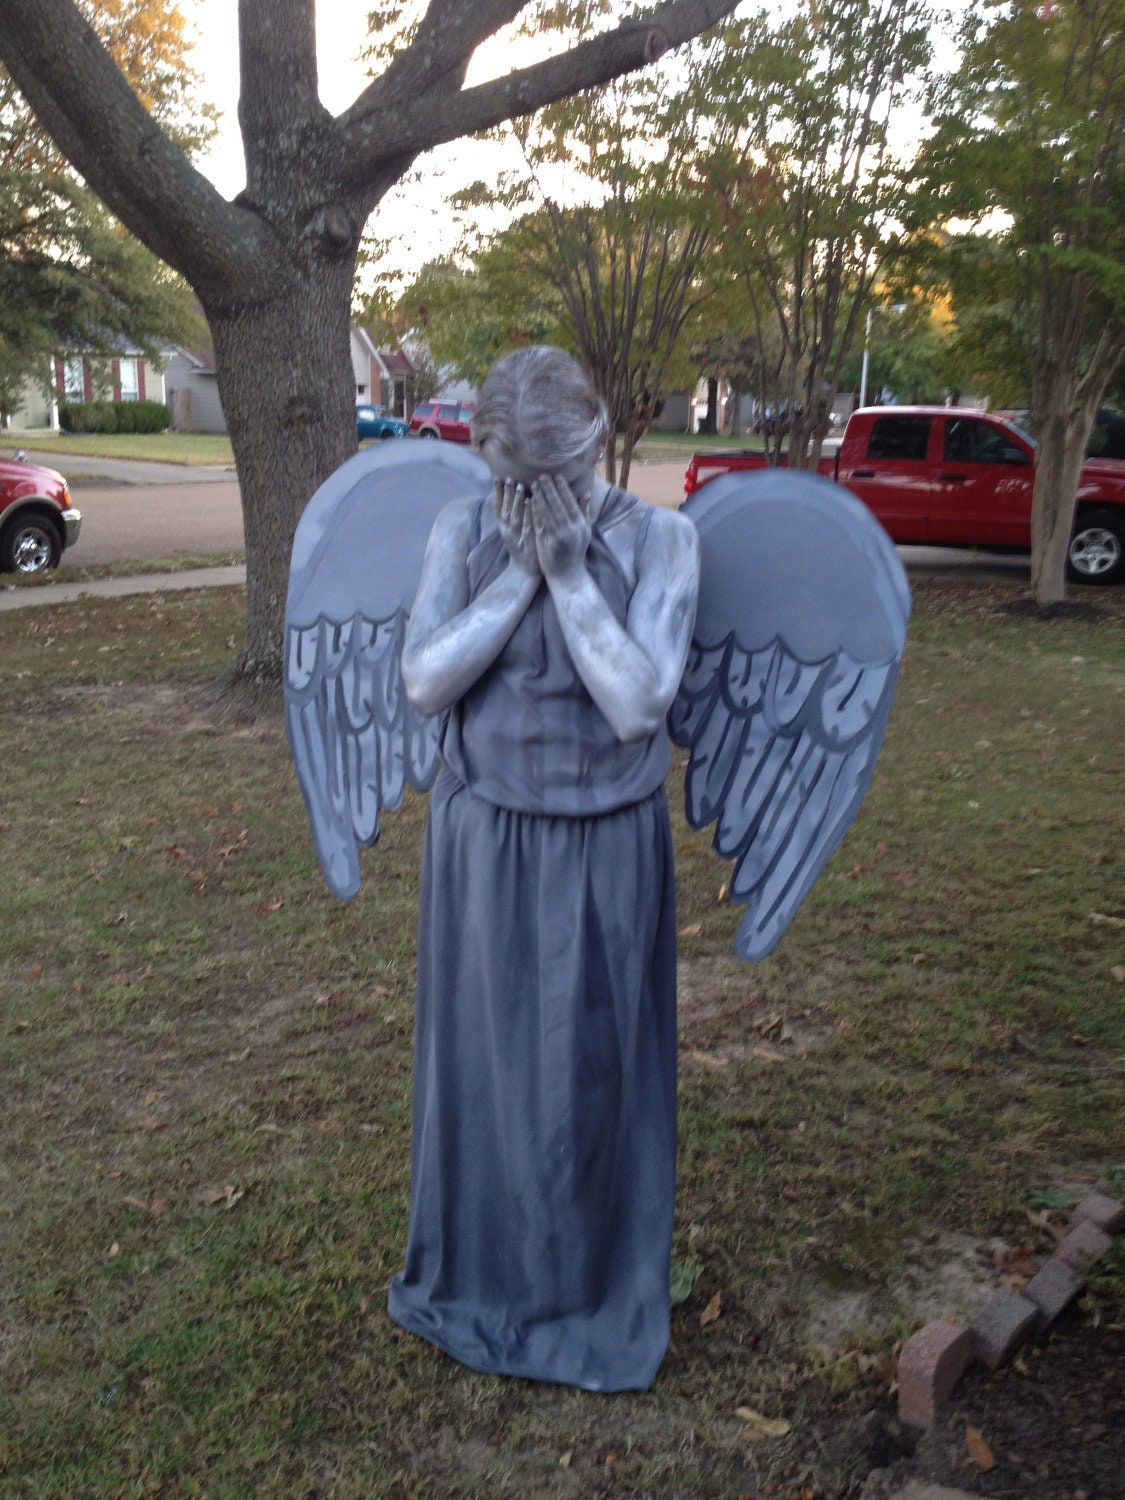 Doctor Who Weeping Angel Statue Costume Handmade by livewholly4him